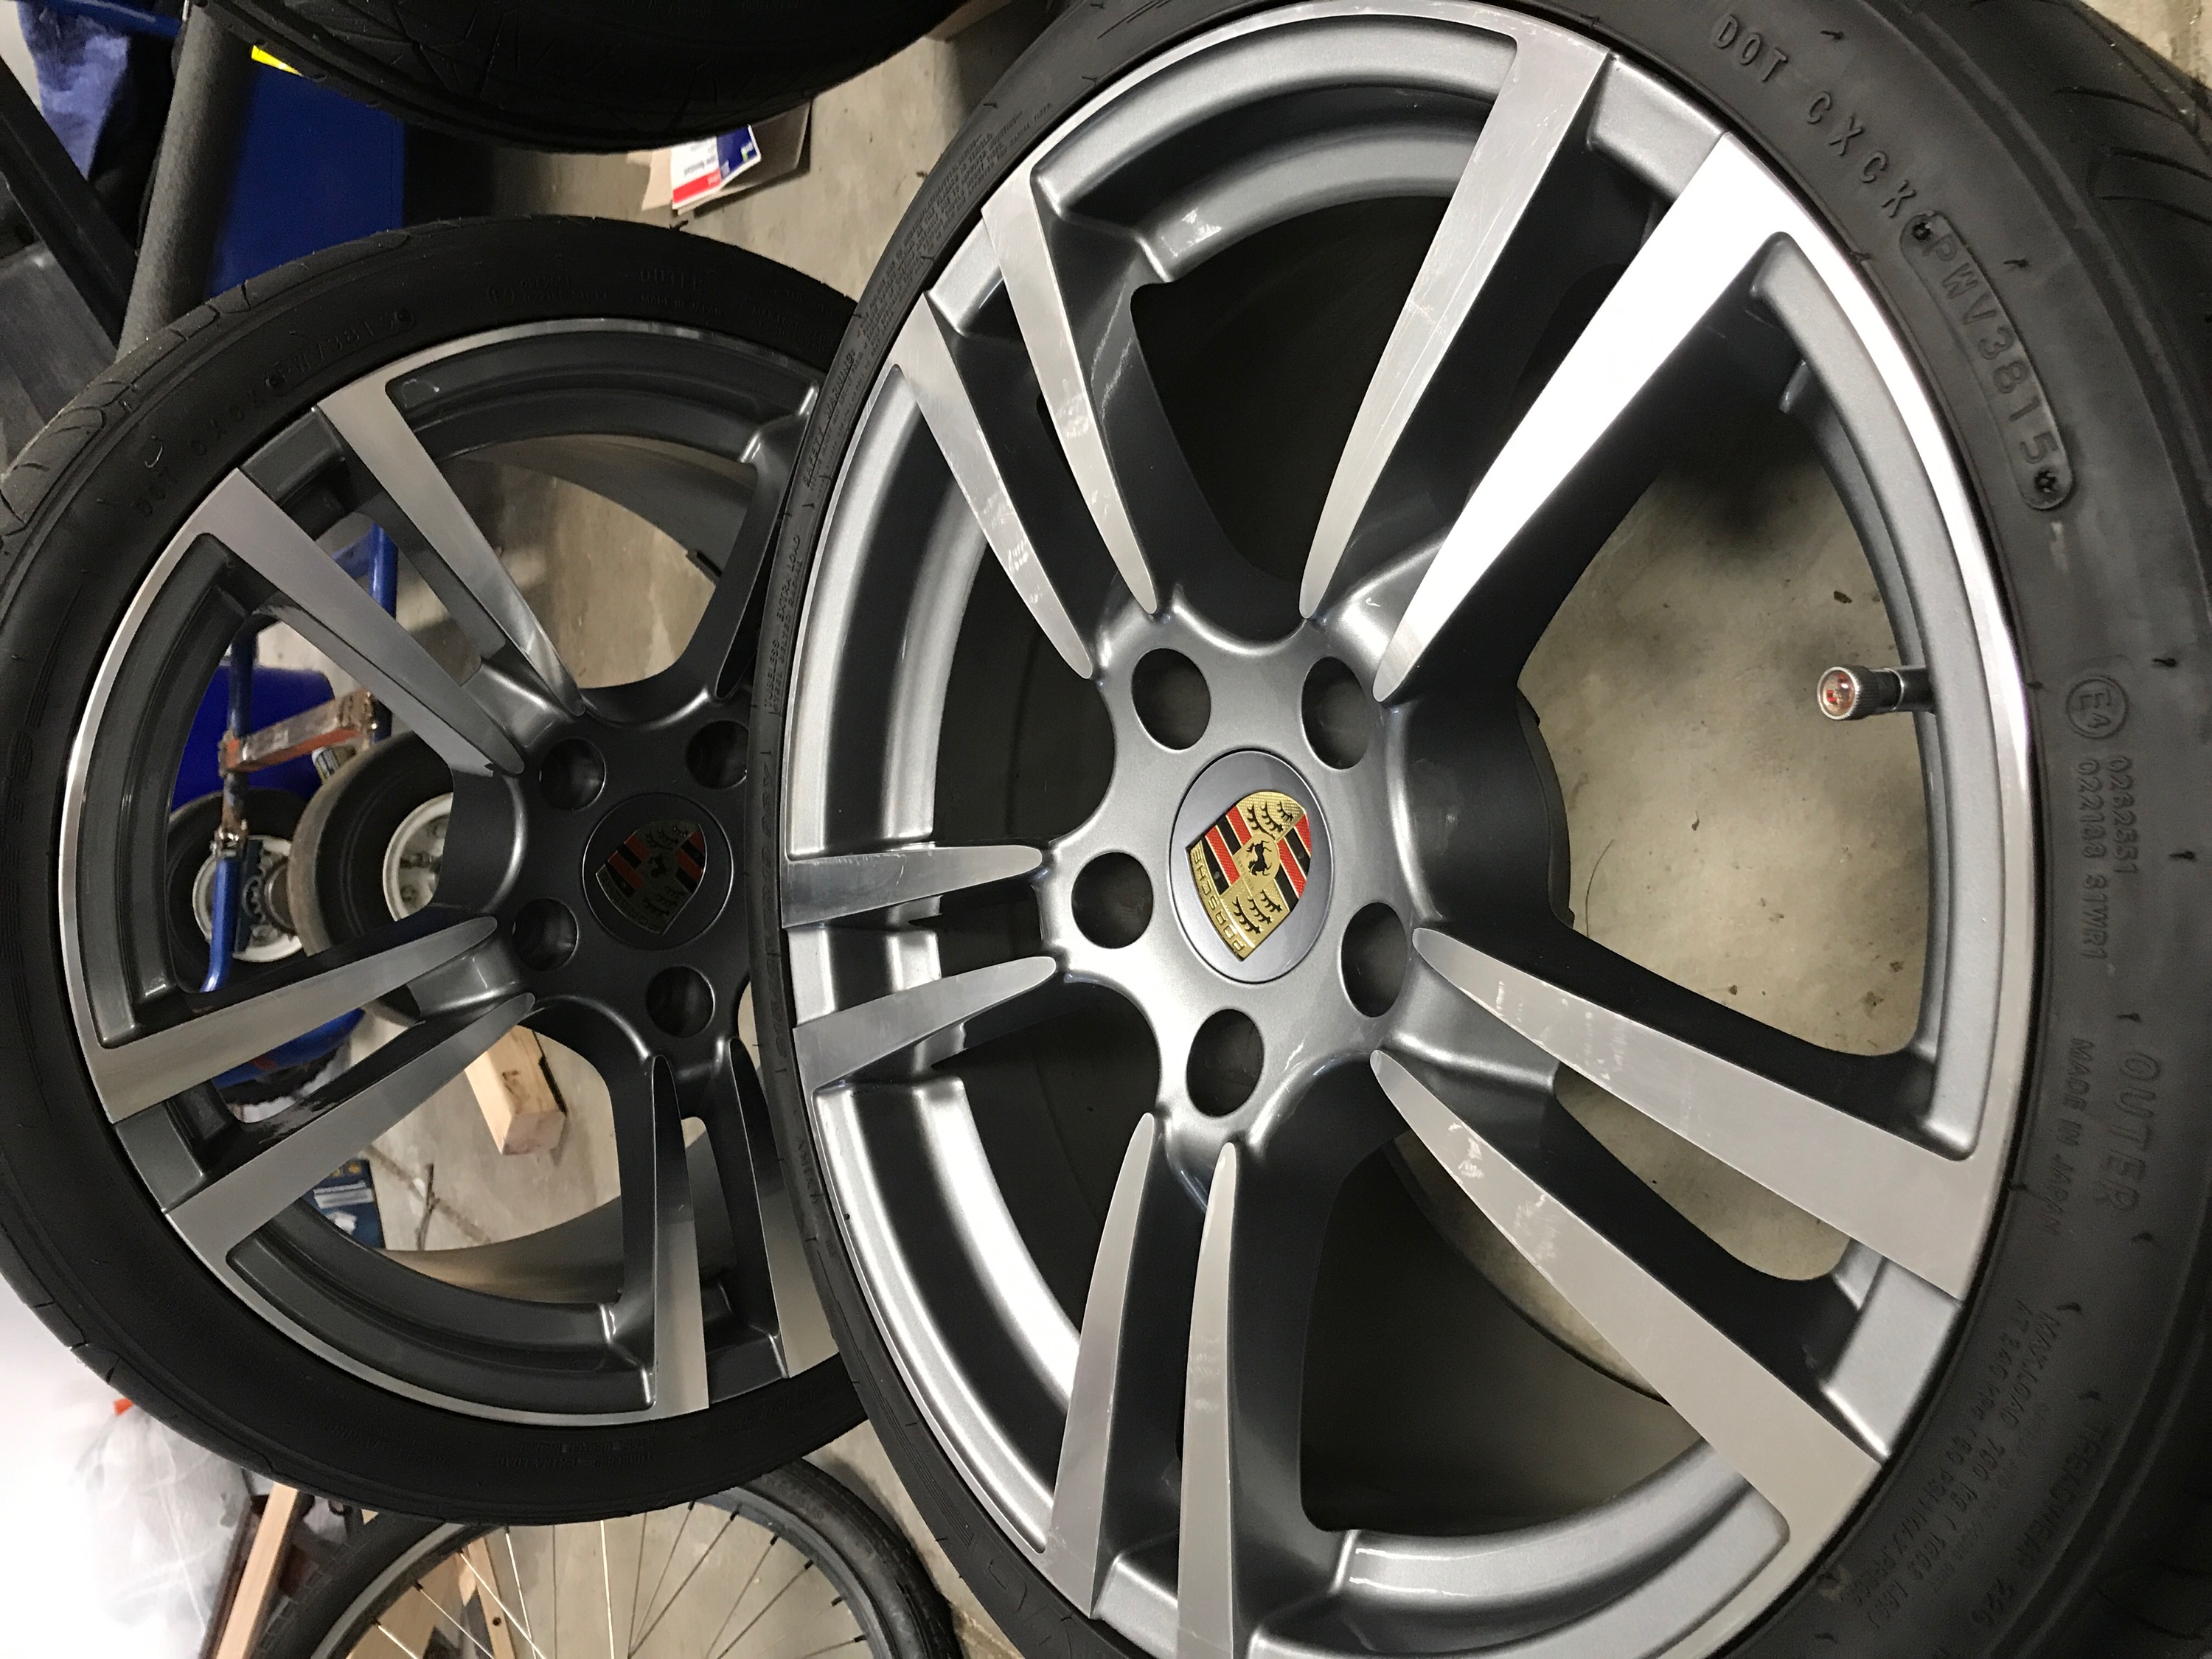 Finance Rims And Tires Near Me nospoondesign